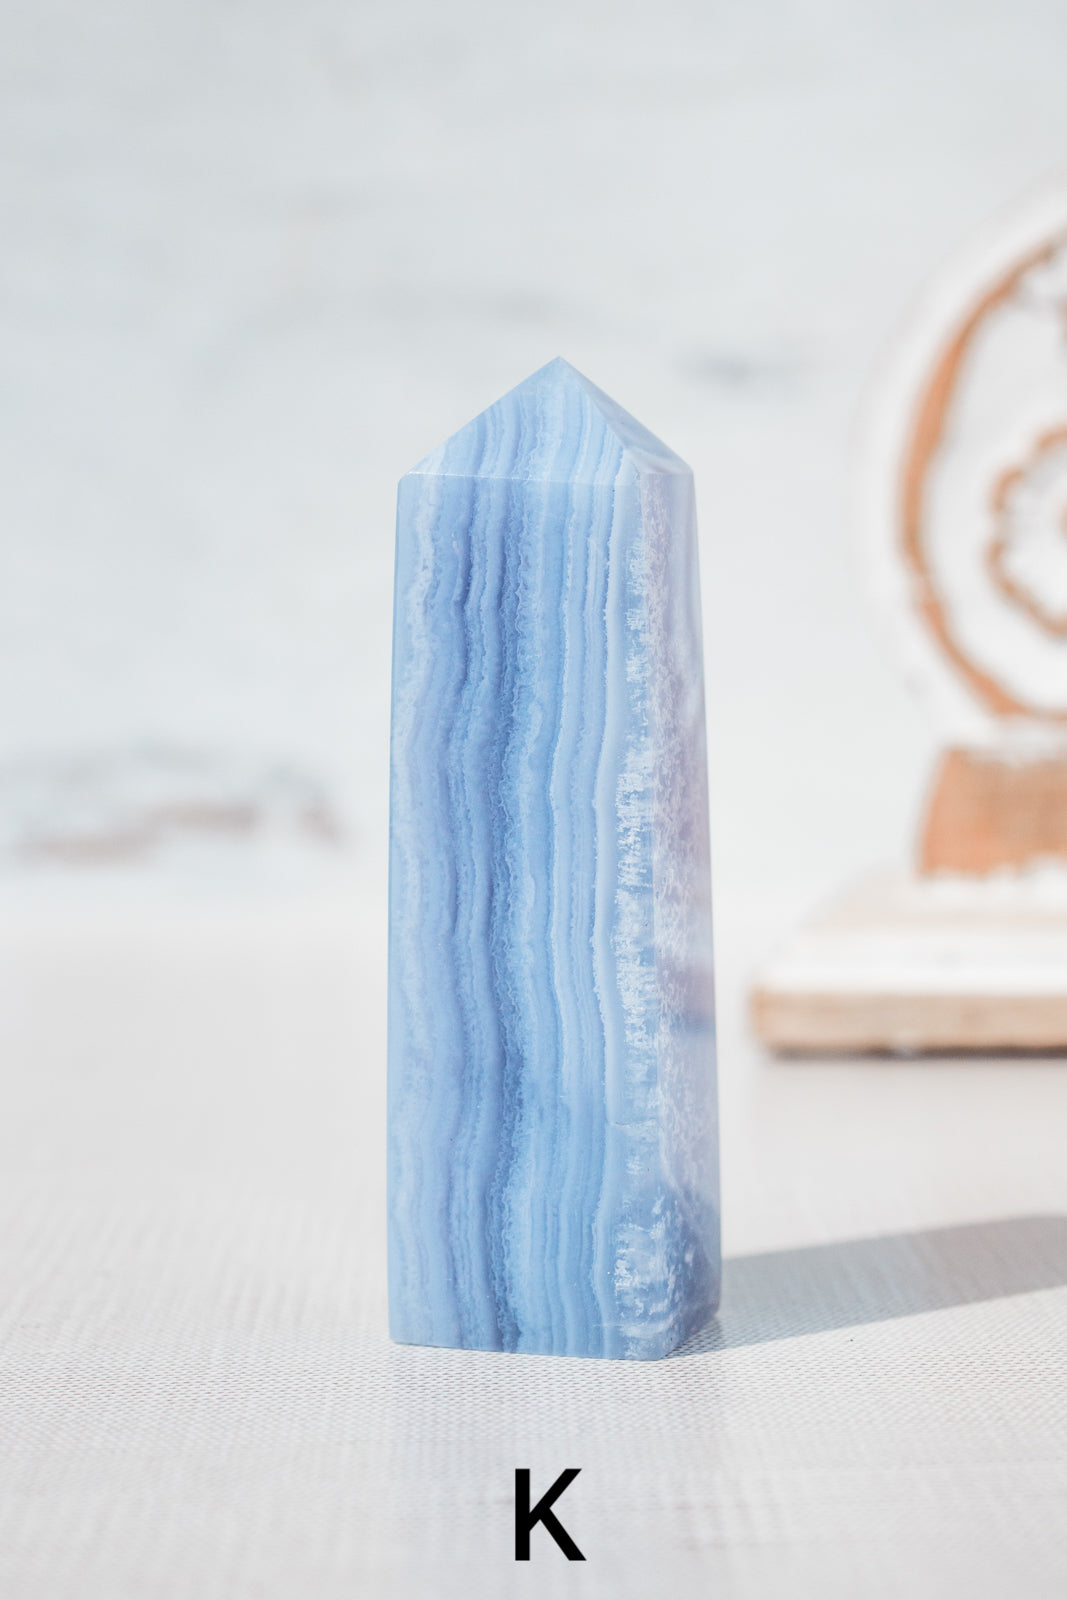 blue lace agate crystal point k